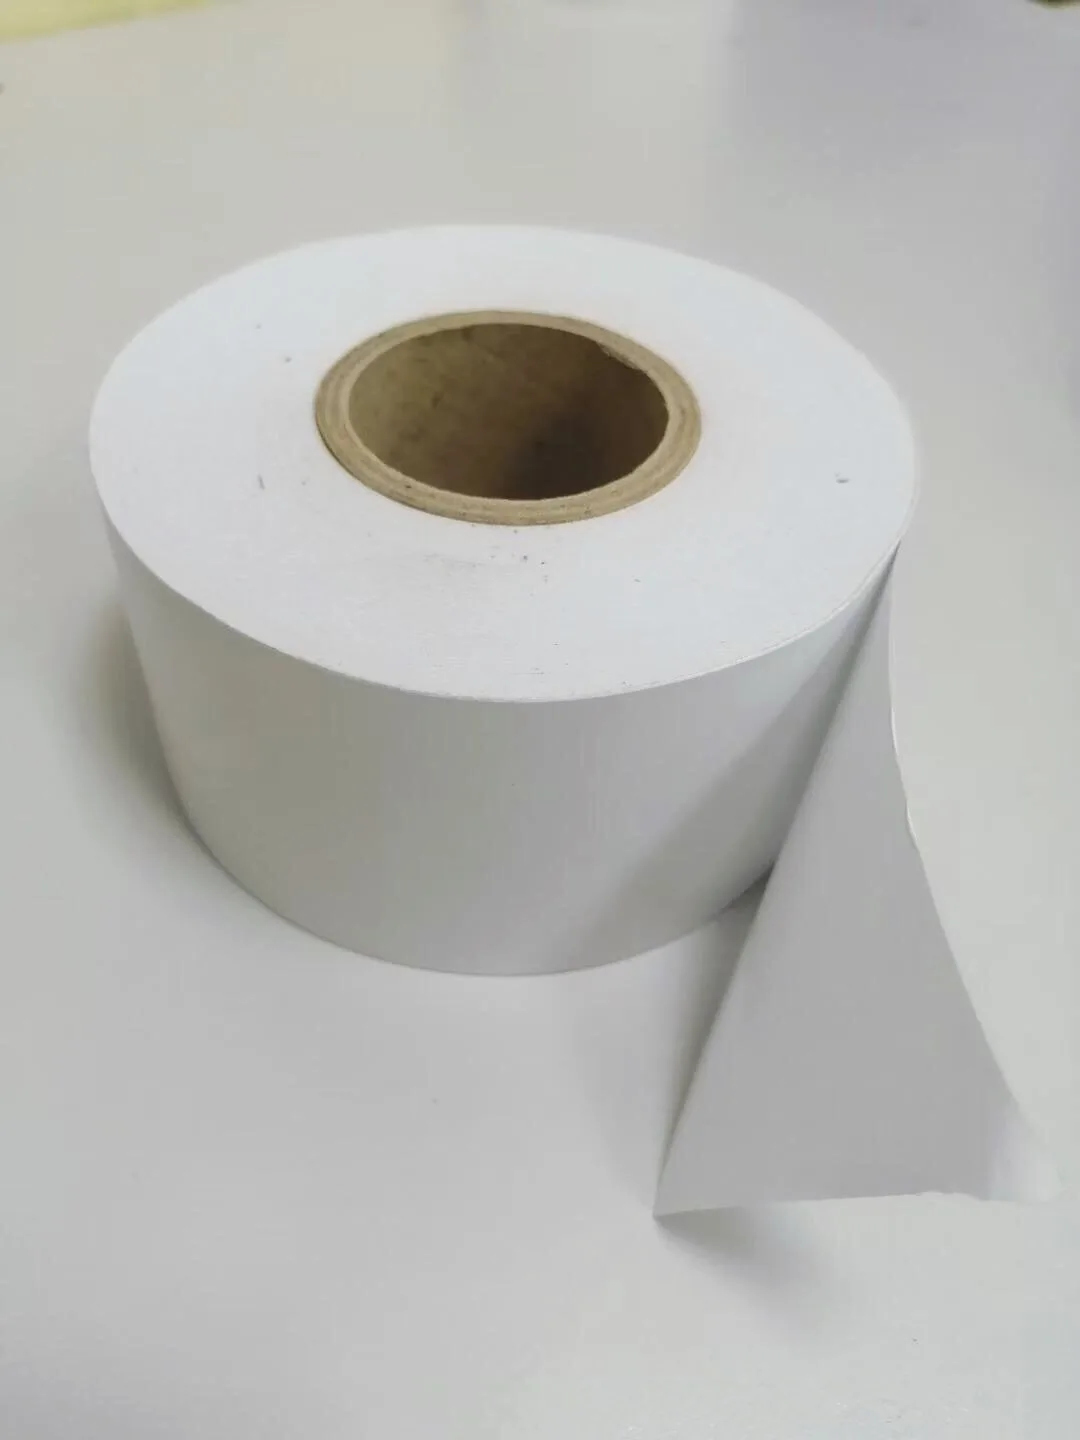 Johnson 80 mm x 80 mm waterproof top coated thermal label Liner less label for scale supermarket